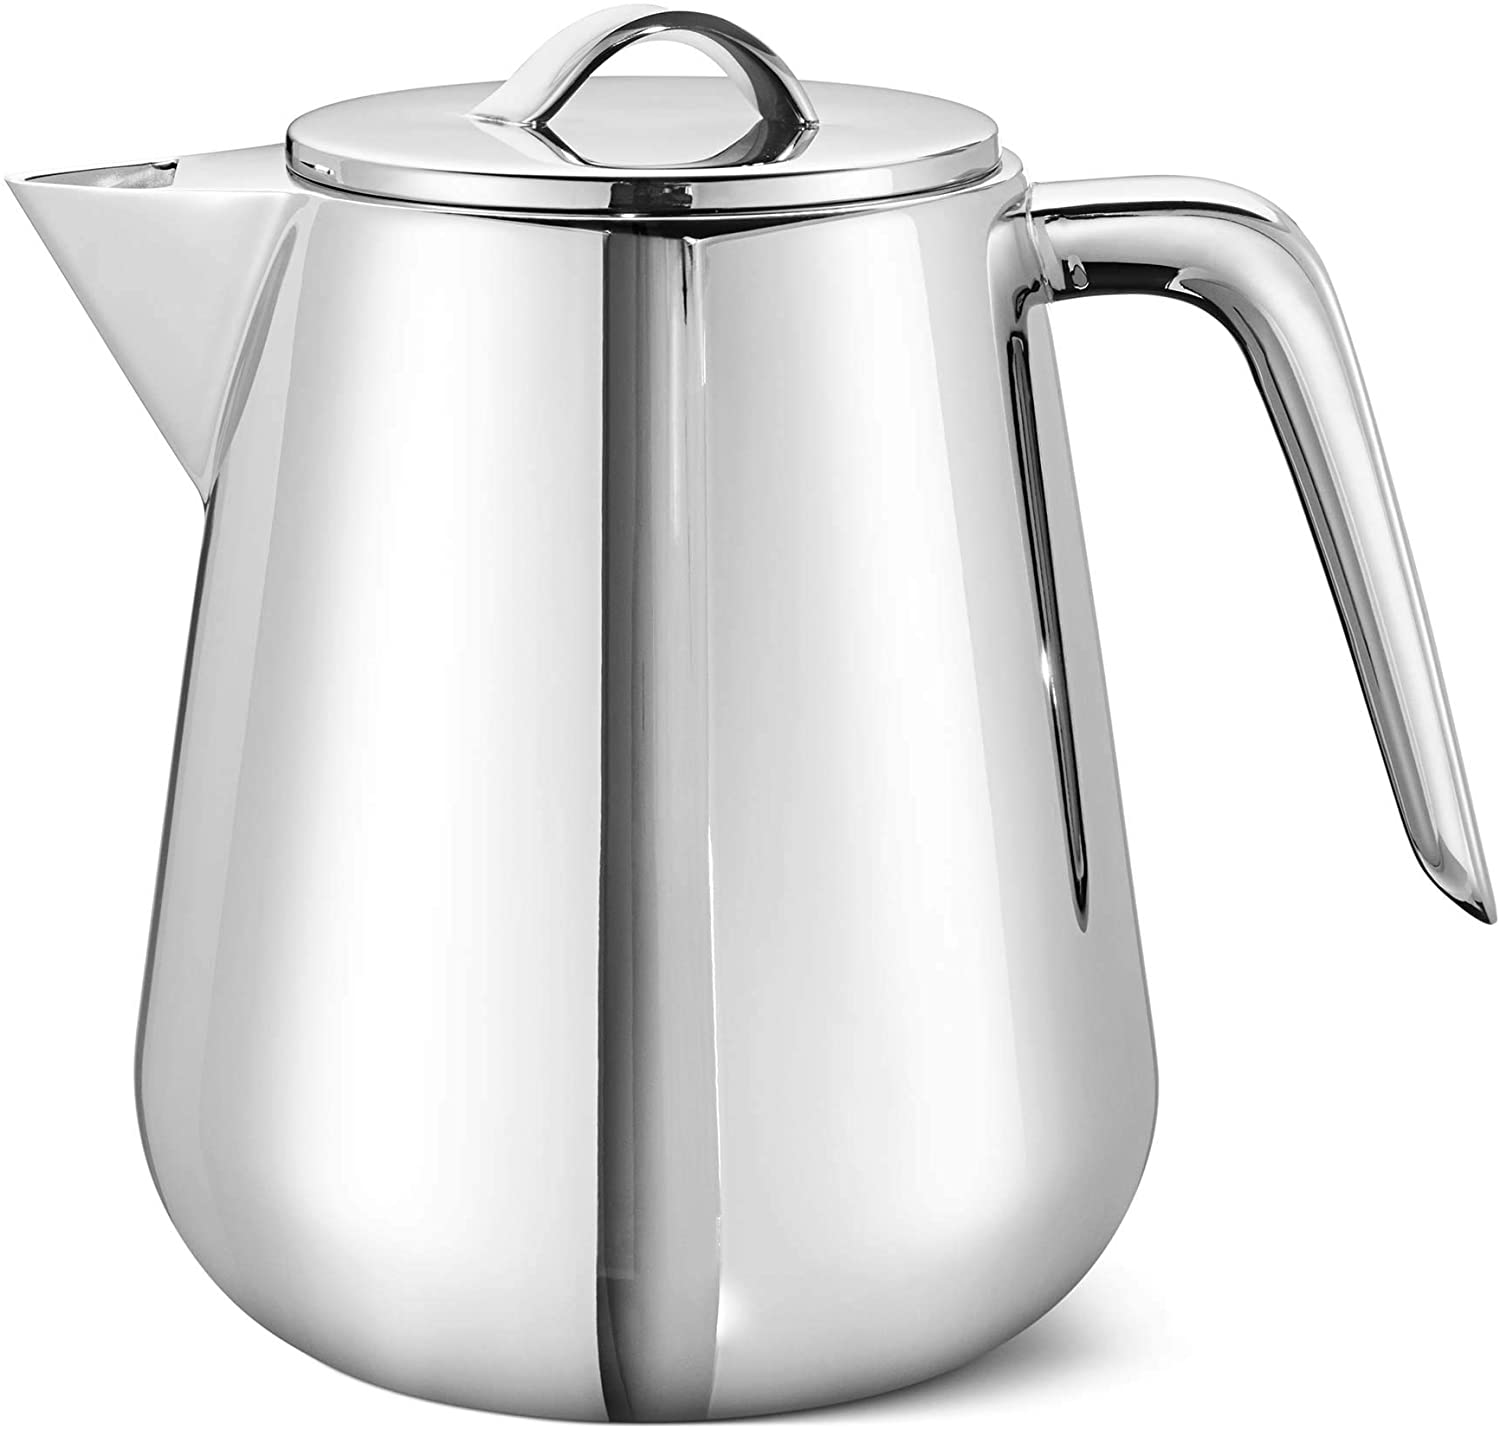 Georg Jensen Stainless Steel Teapot, Silver, One Size